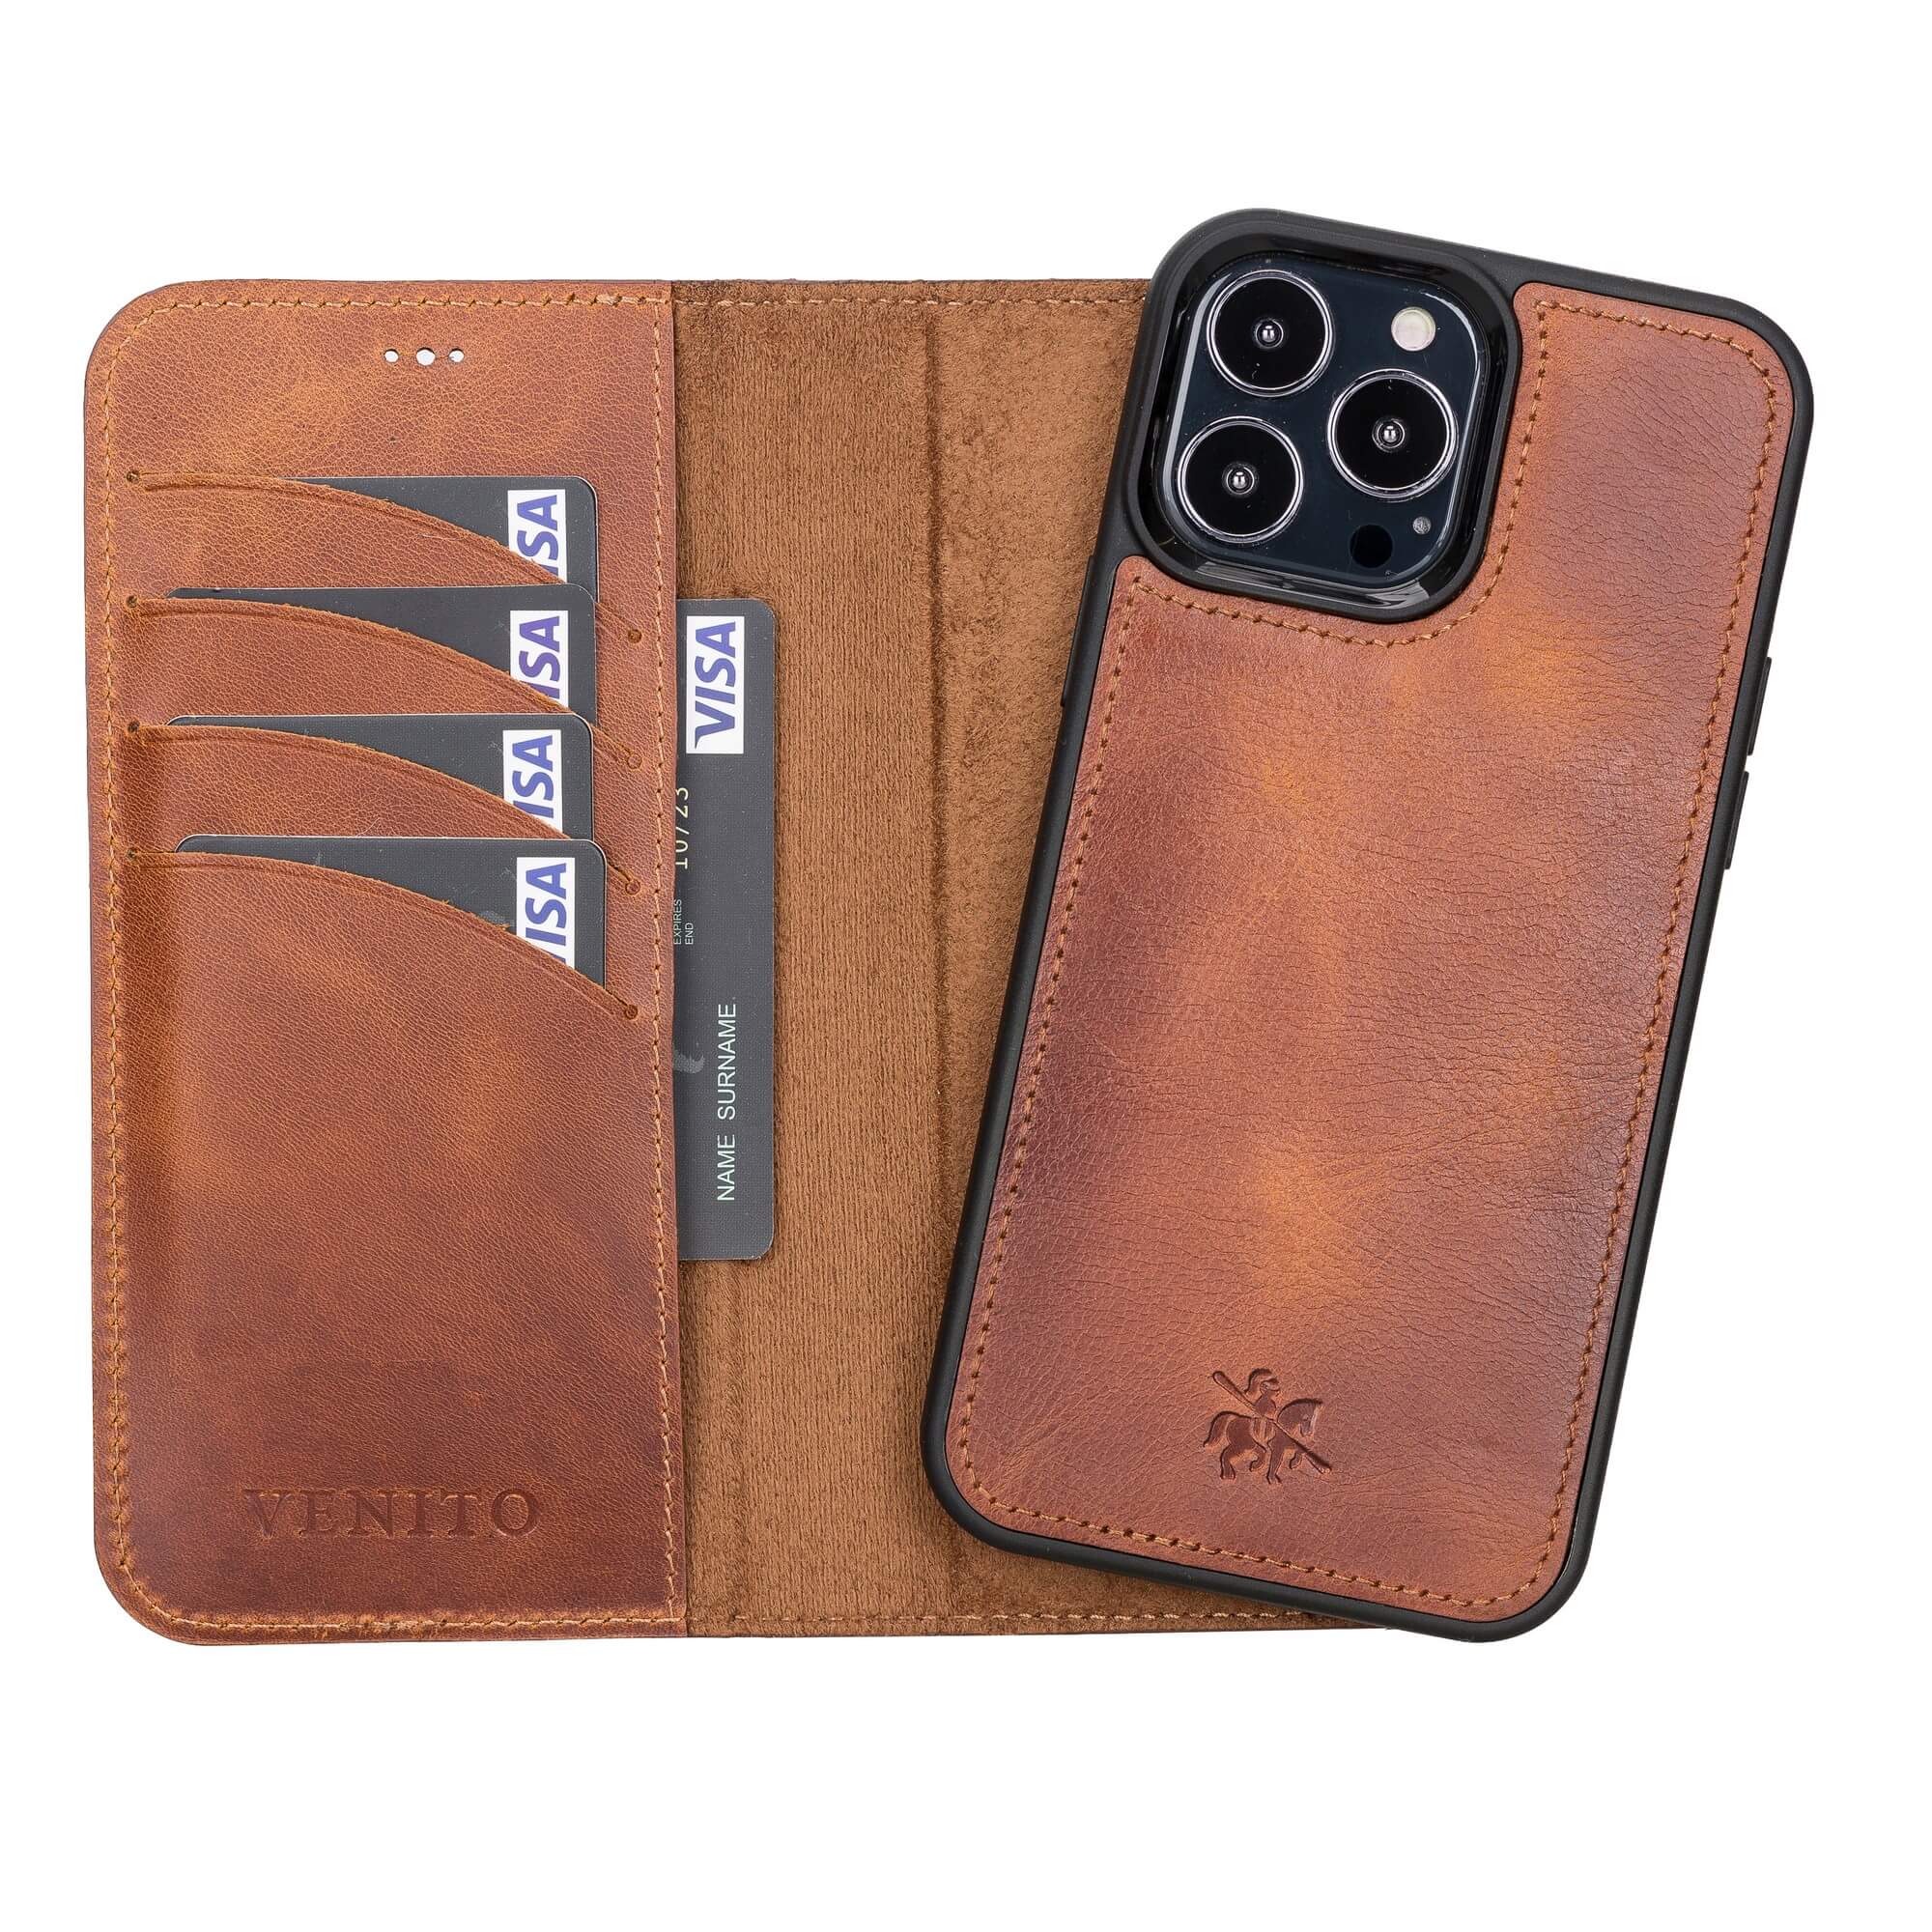 Venito Ravenna Slim Magic Leather Wallet Case for iPhone 13 Pro Max (6.7 in) with A Magnetic Flip & Four Card Slots and A Bill Pocket & Lightweight